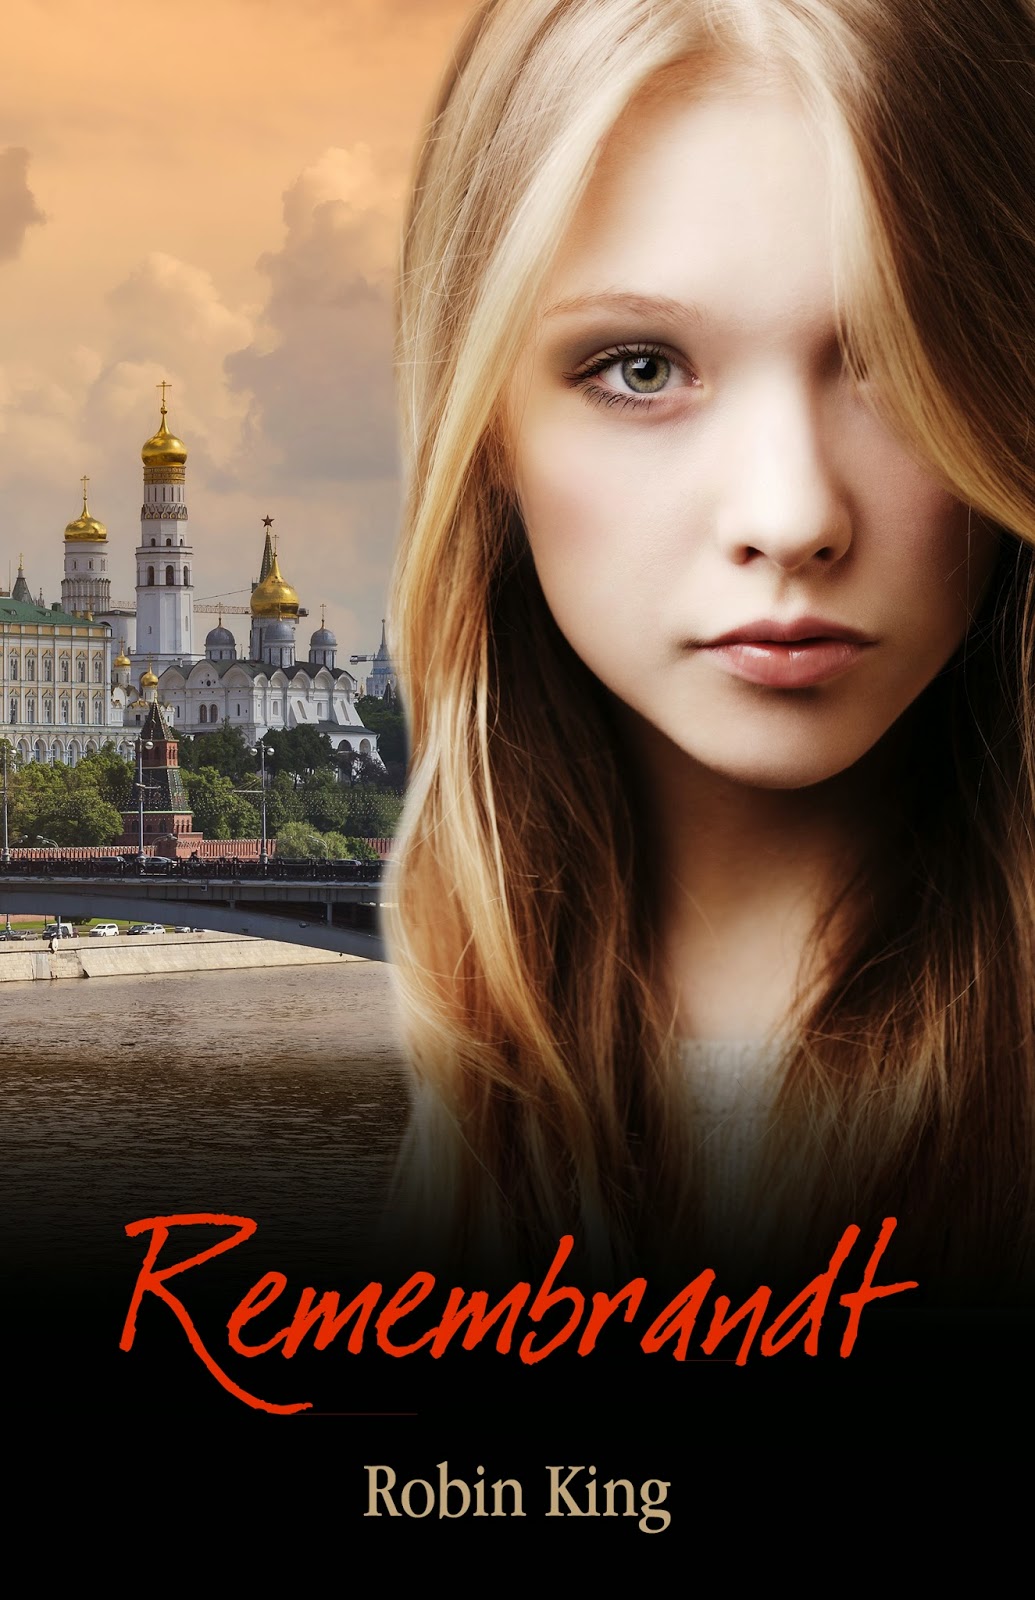 Young Adult suspense and romance